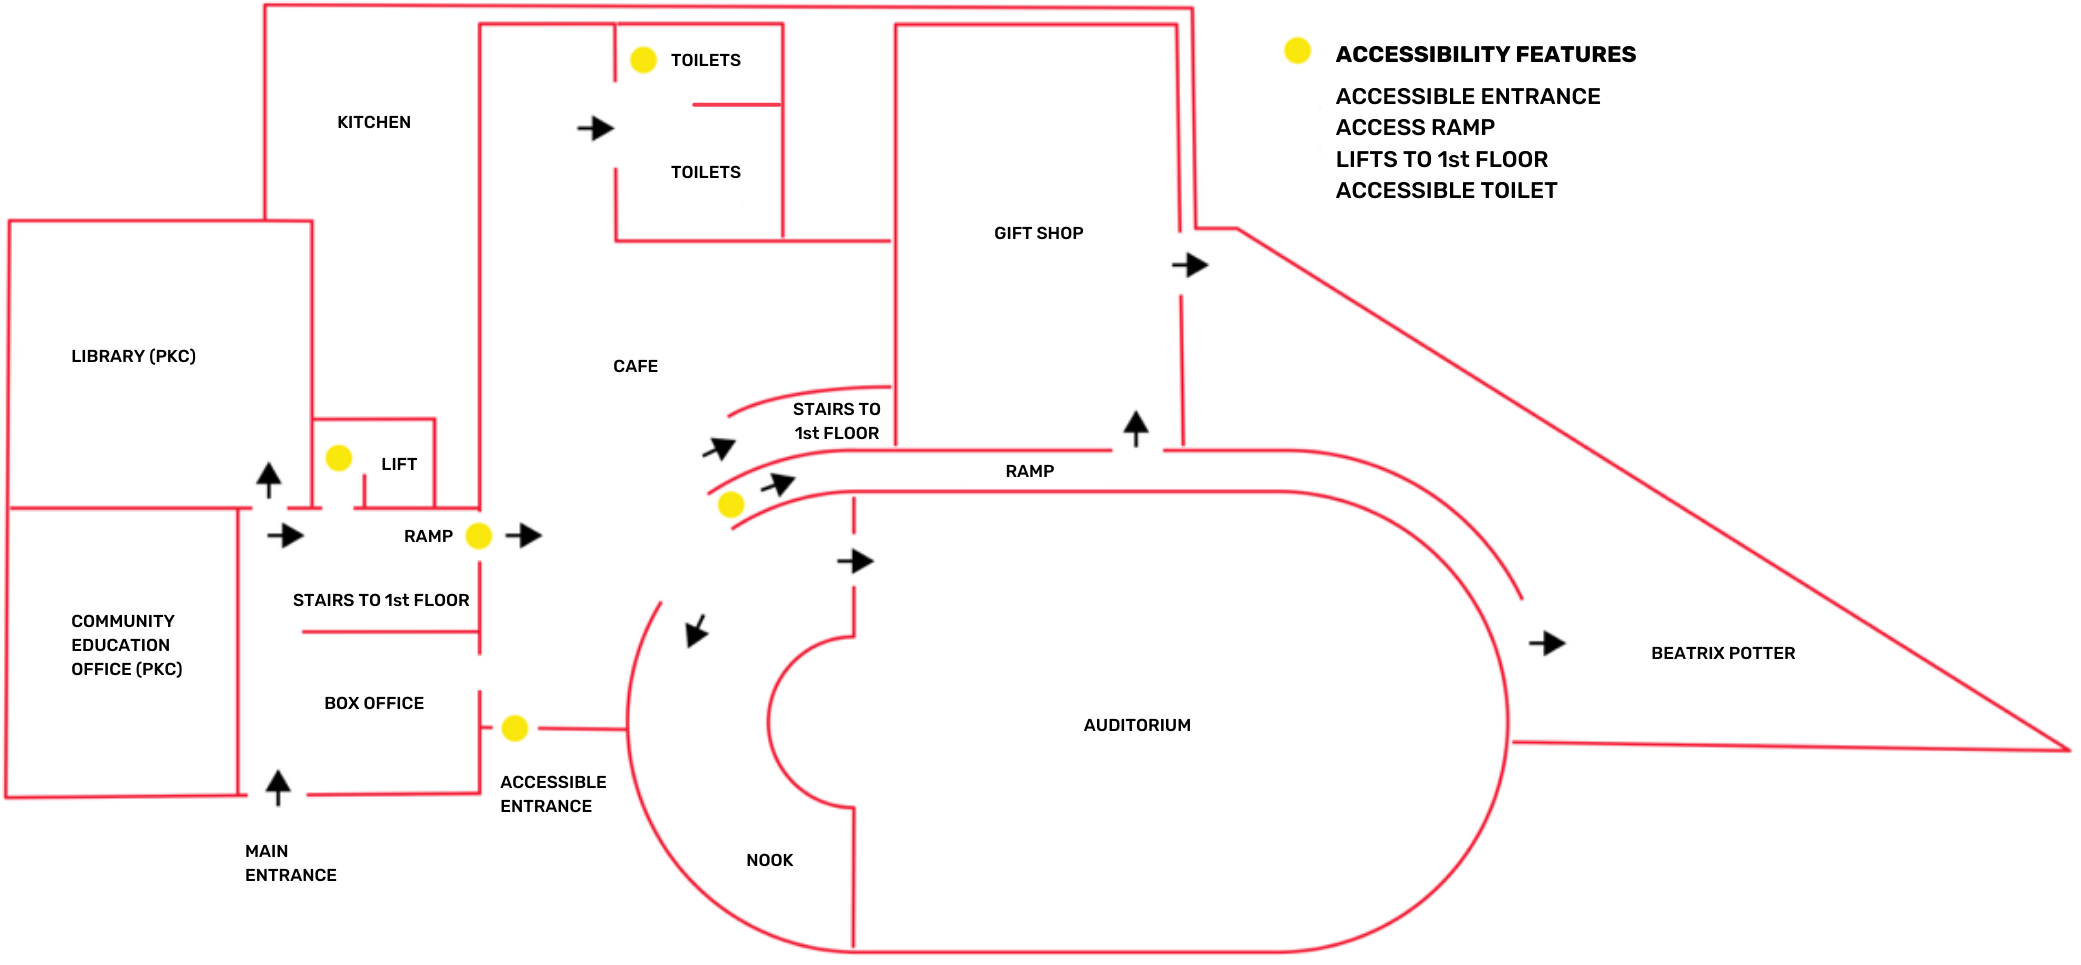 Arts and conference venue Ground floor plan with accessibility features